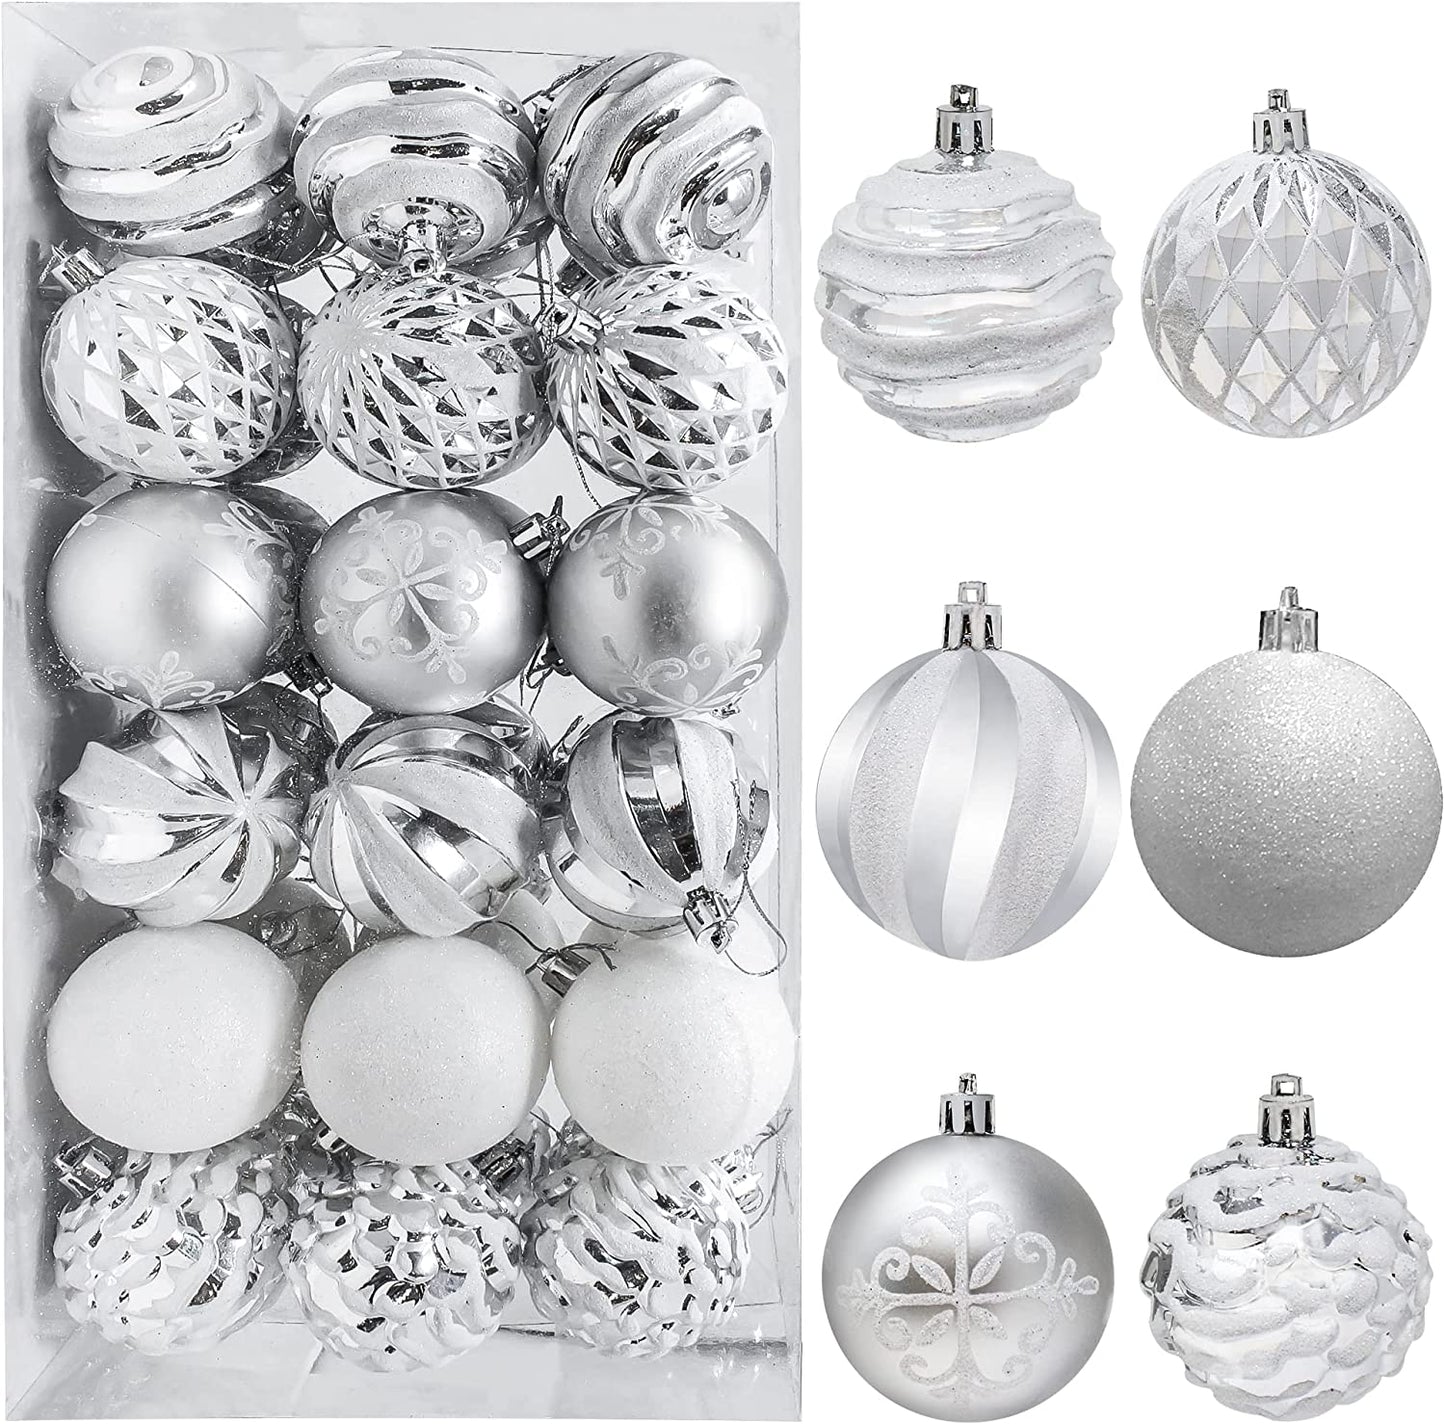 36 pieces Silver and White Christmas Ornaments